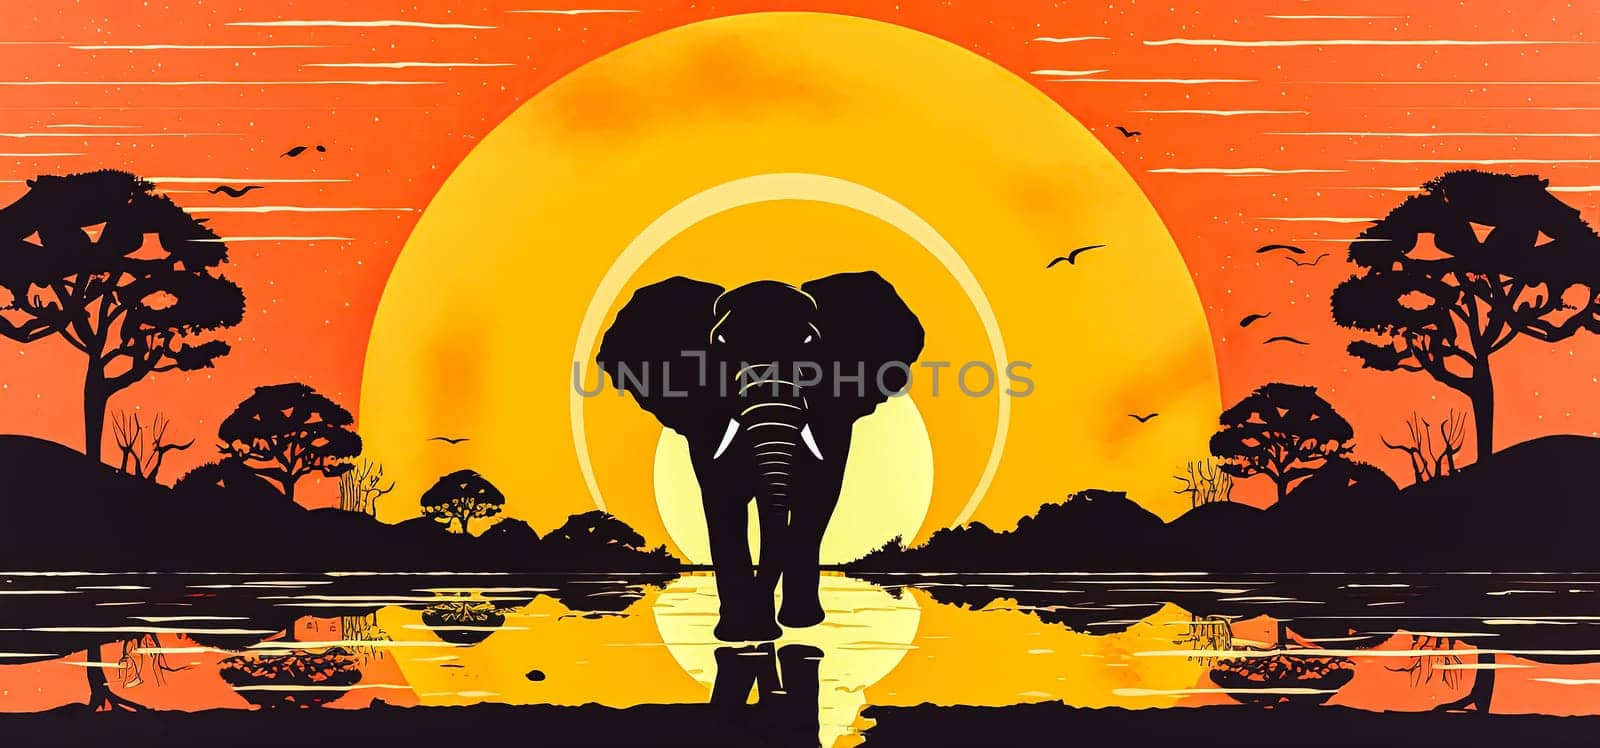 A large elephant is walking across a body of water in front of a large orange sun. The scene is serene and peaceful, with the elephant being the main focus of the image